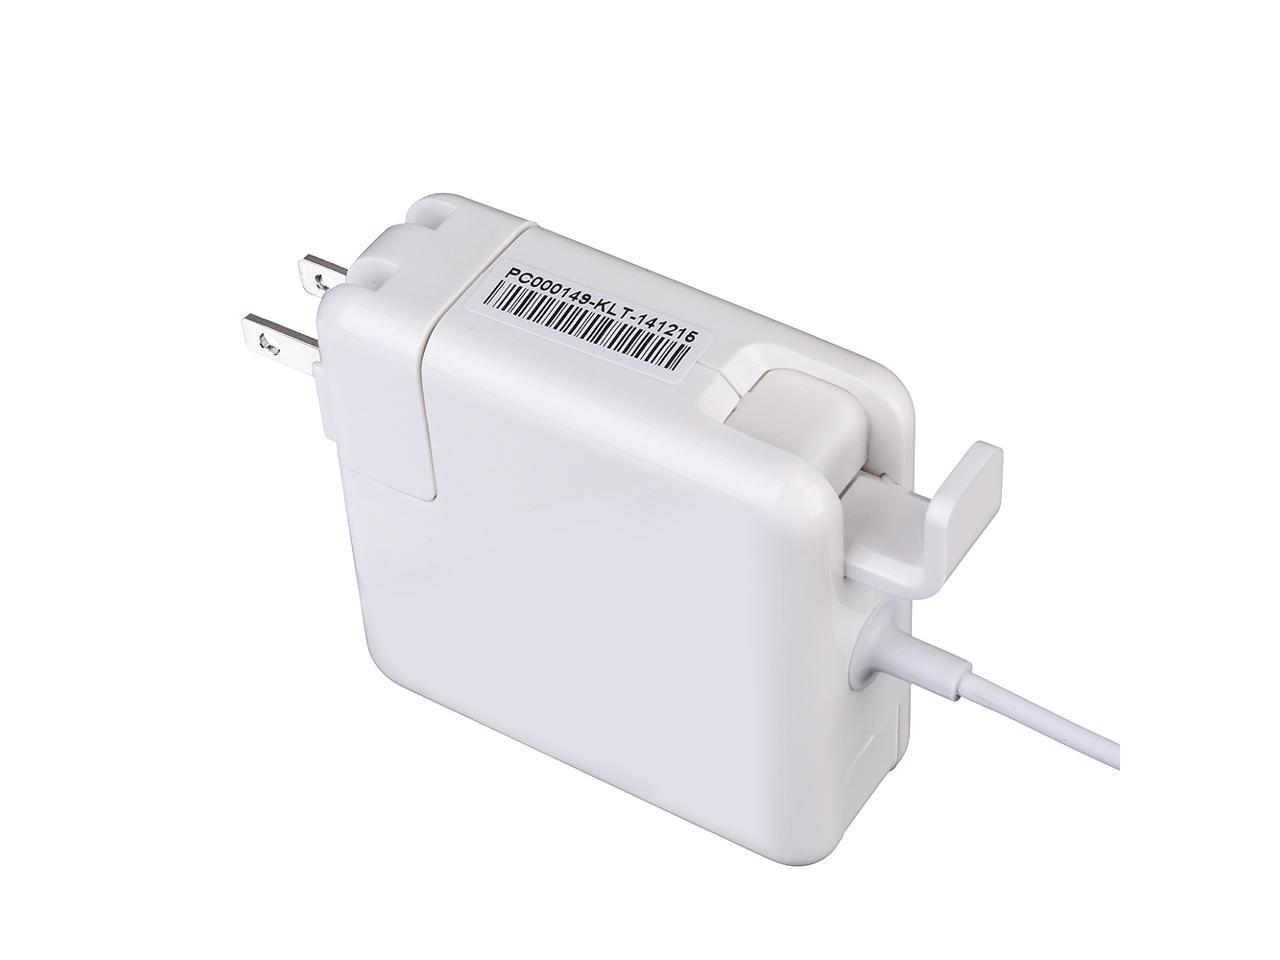 macbook air 13 inch charger